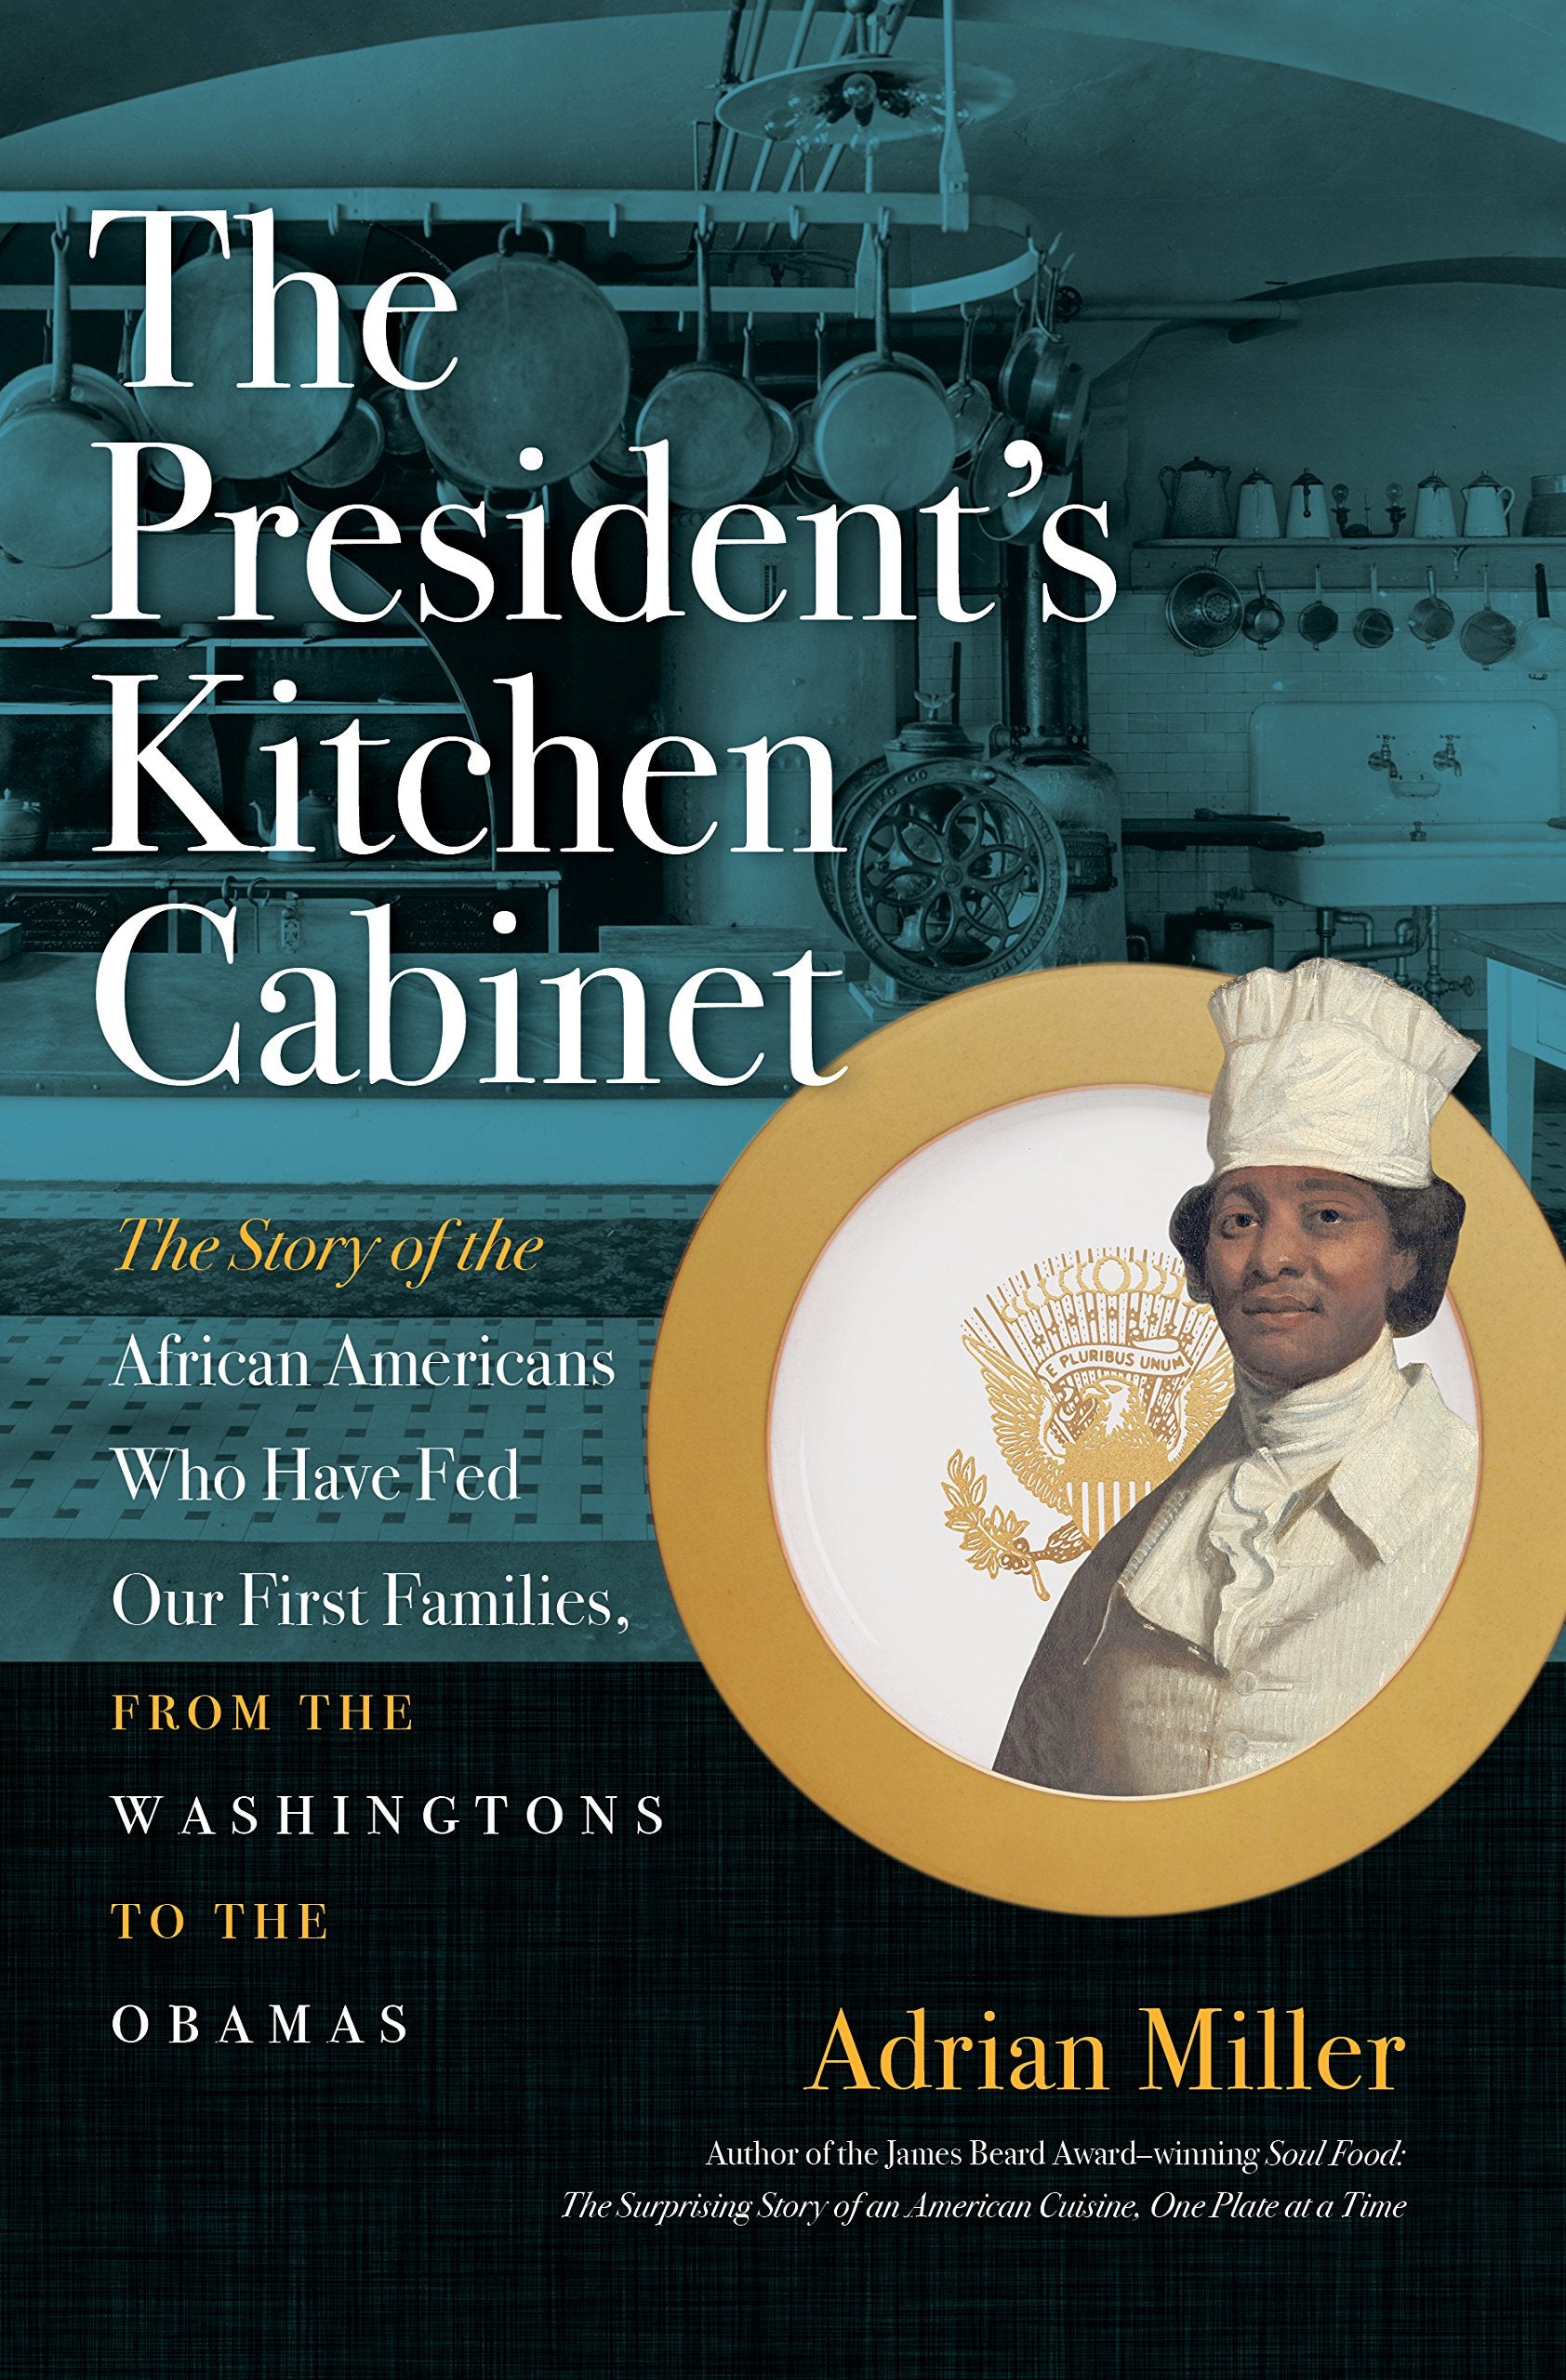 The President's Kitchen Cabinet: The Story of the African Americans Who Have Fed Our First Families, from the Washingtons to the Obamas (Adrian Miller) *Signed*